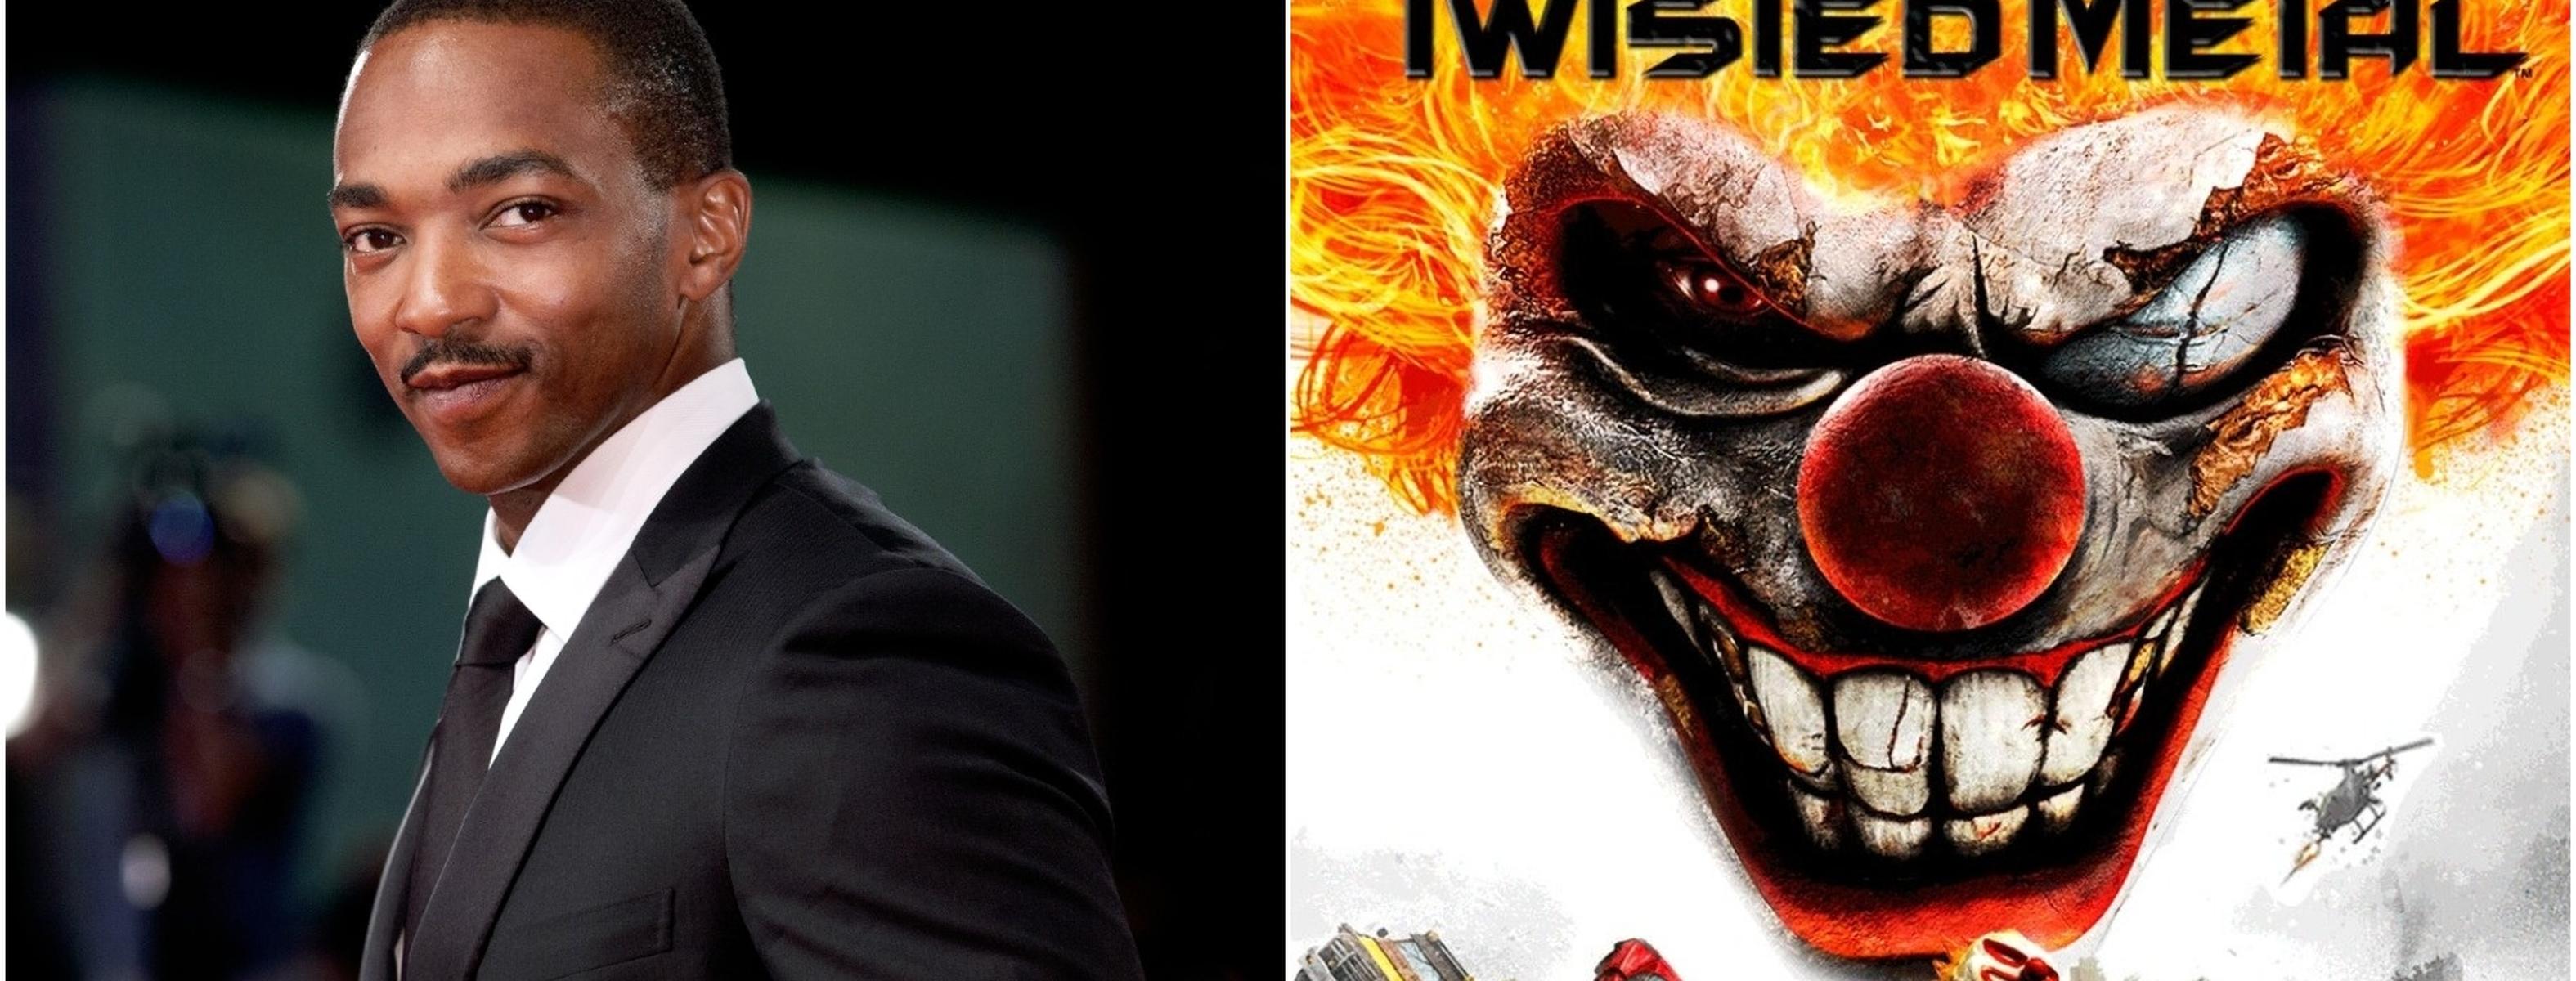 Will Arnett to Voice Sweet Tooth in 'Twisted Metal' Series at Peacock